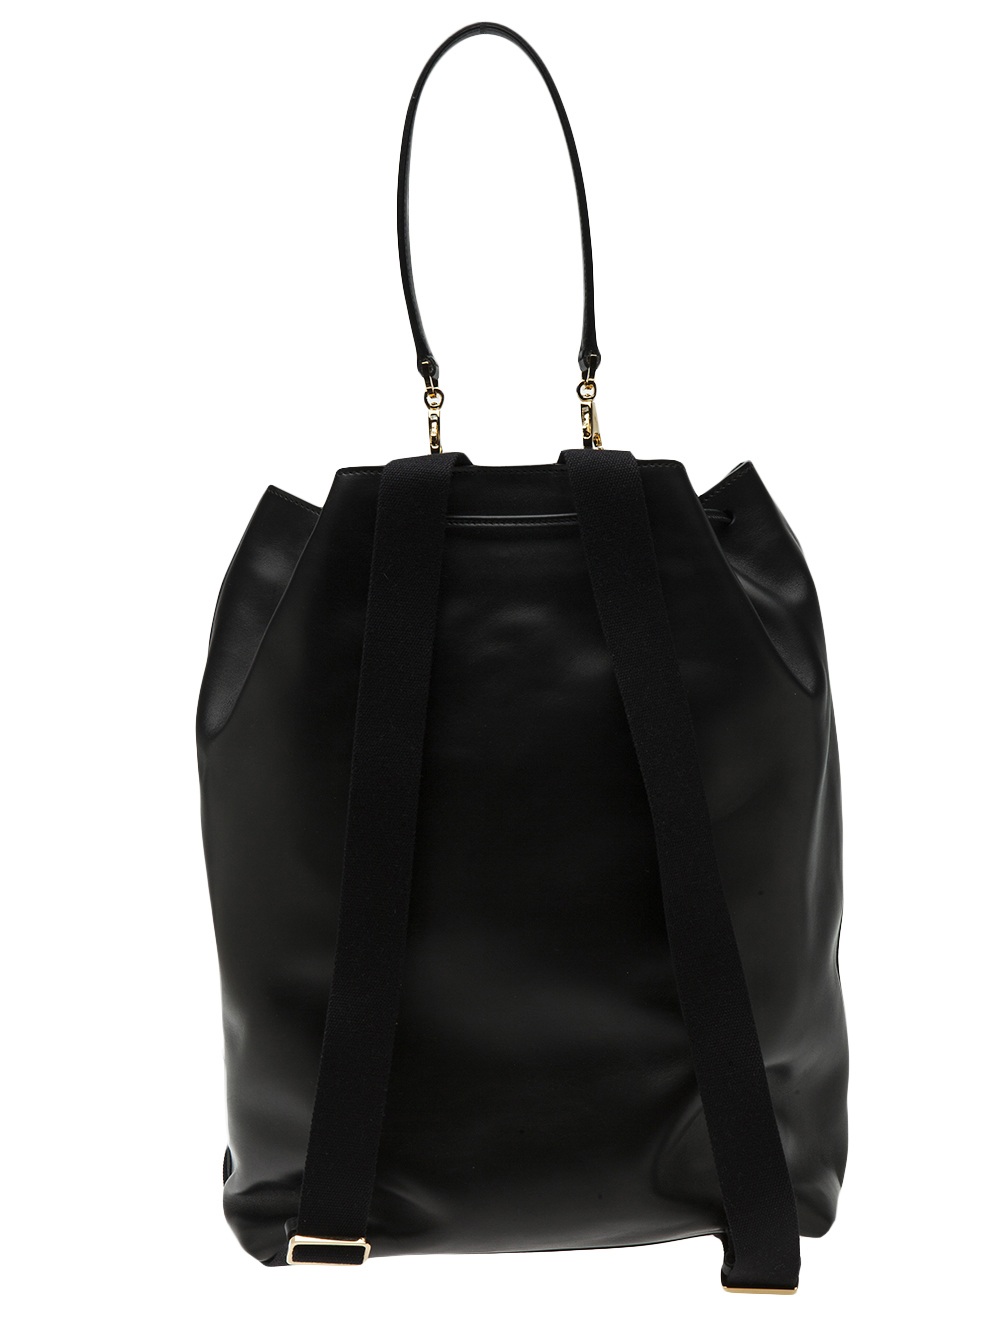 Lyst - The Row Backpack in Black